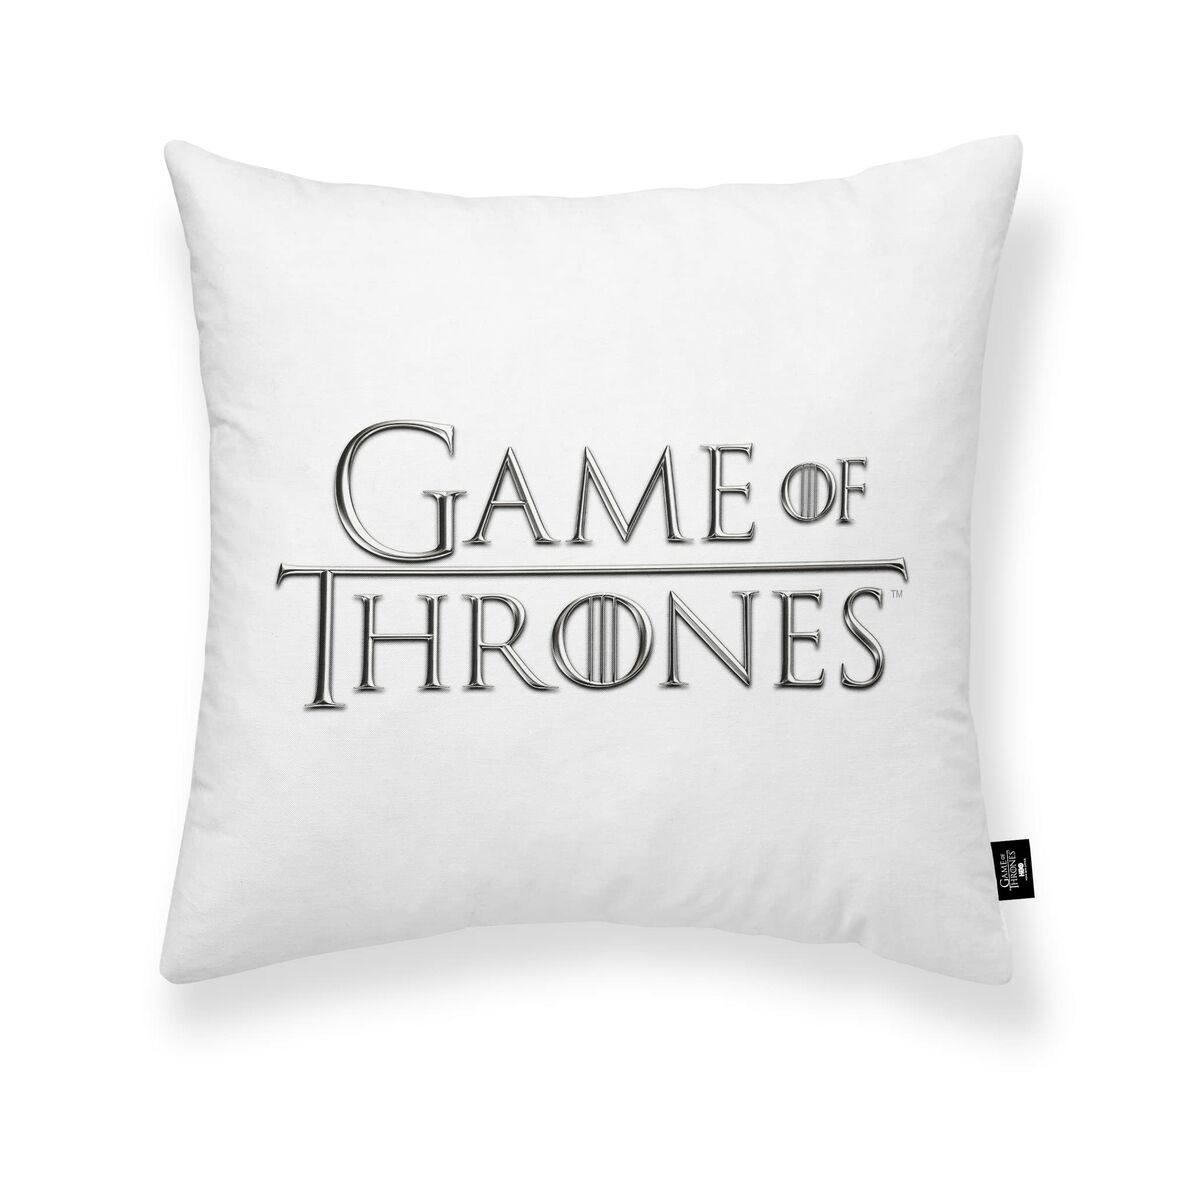 Cushion cover Game of Thrones White 45 x 45 cm